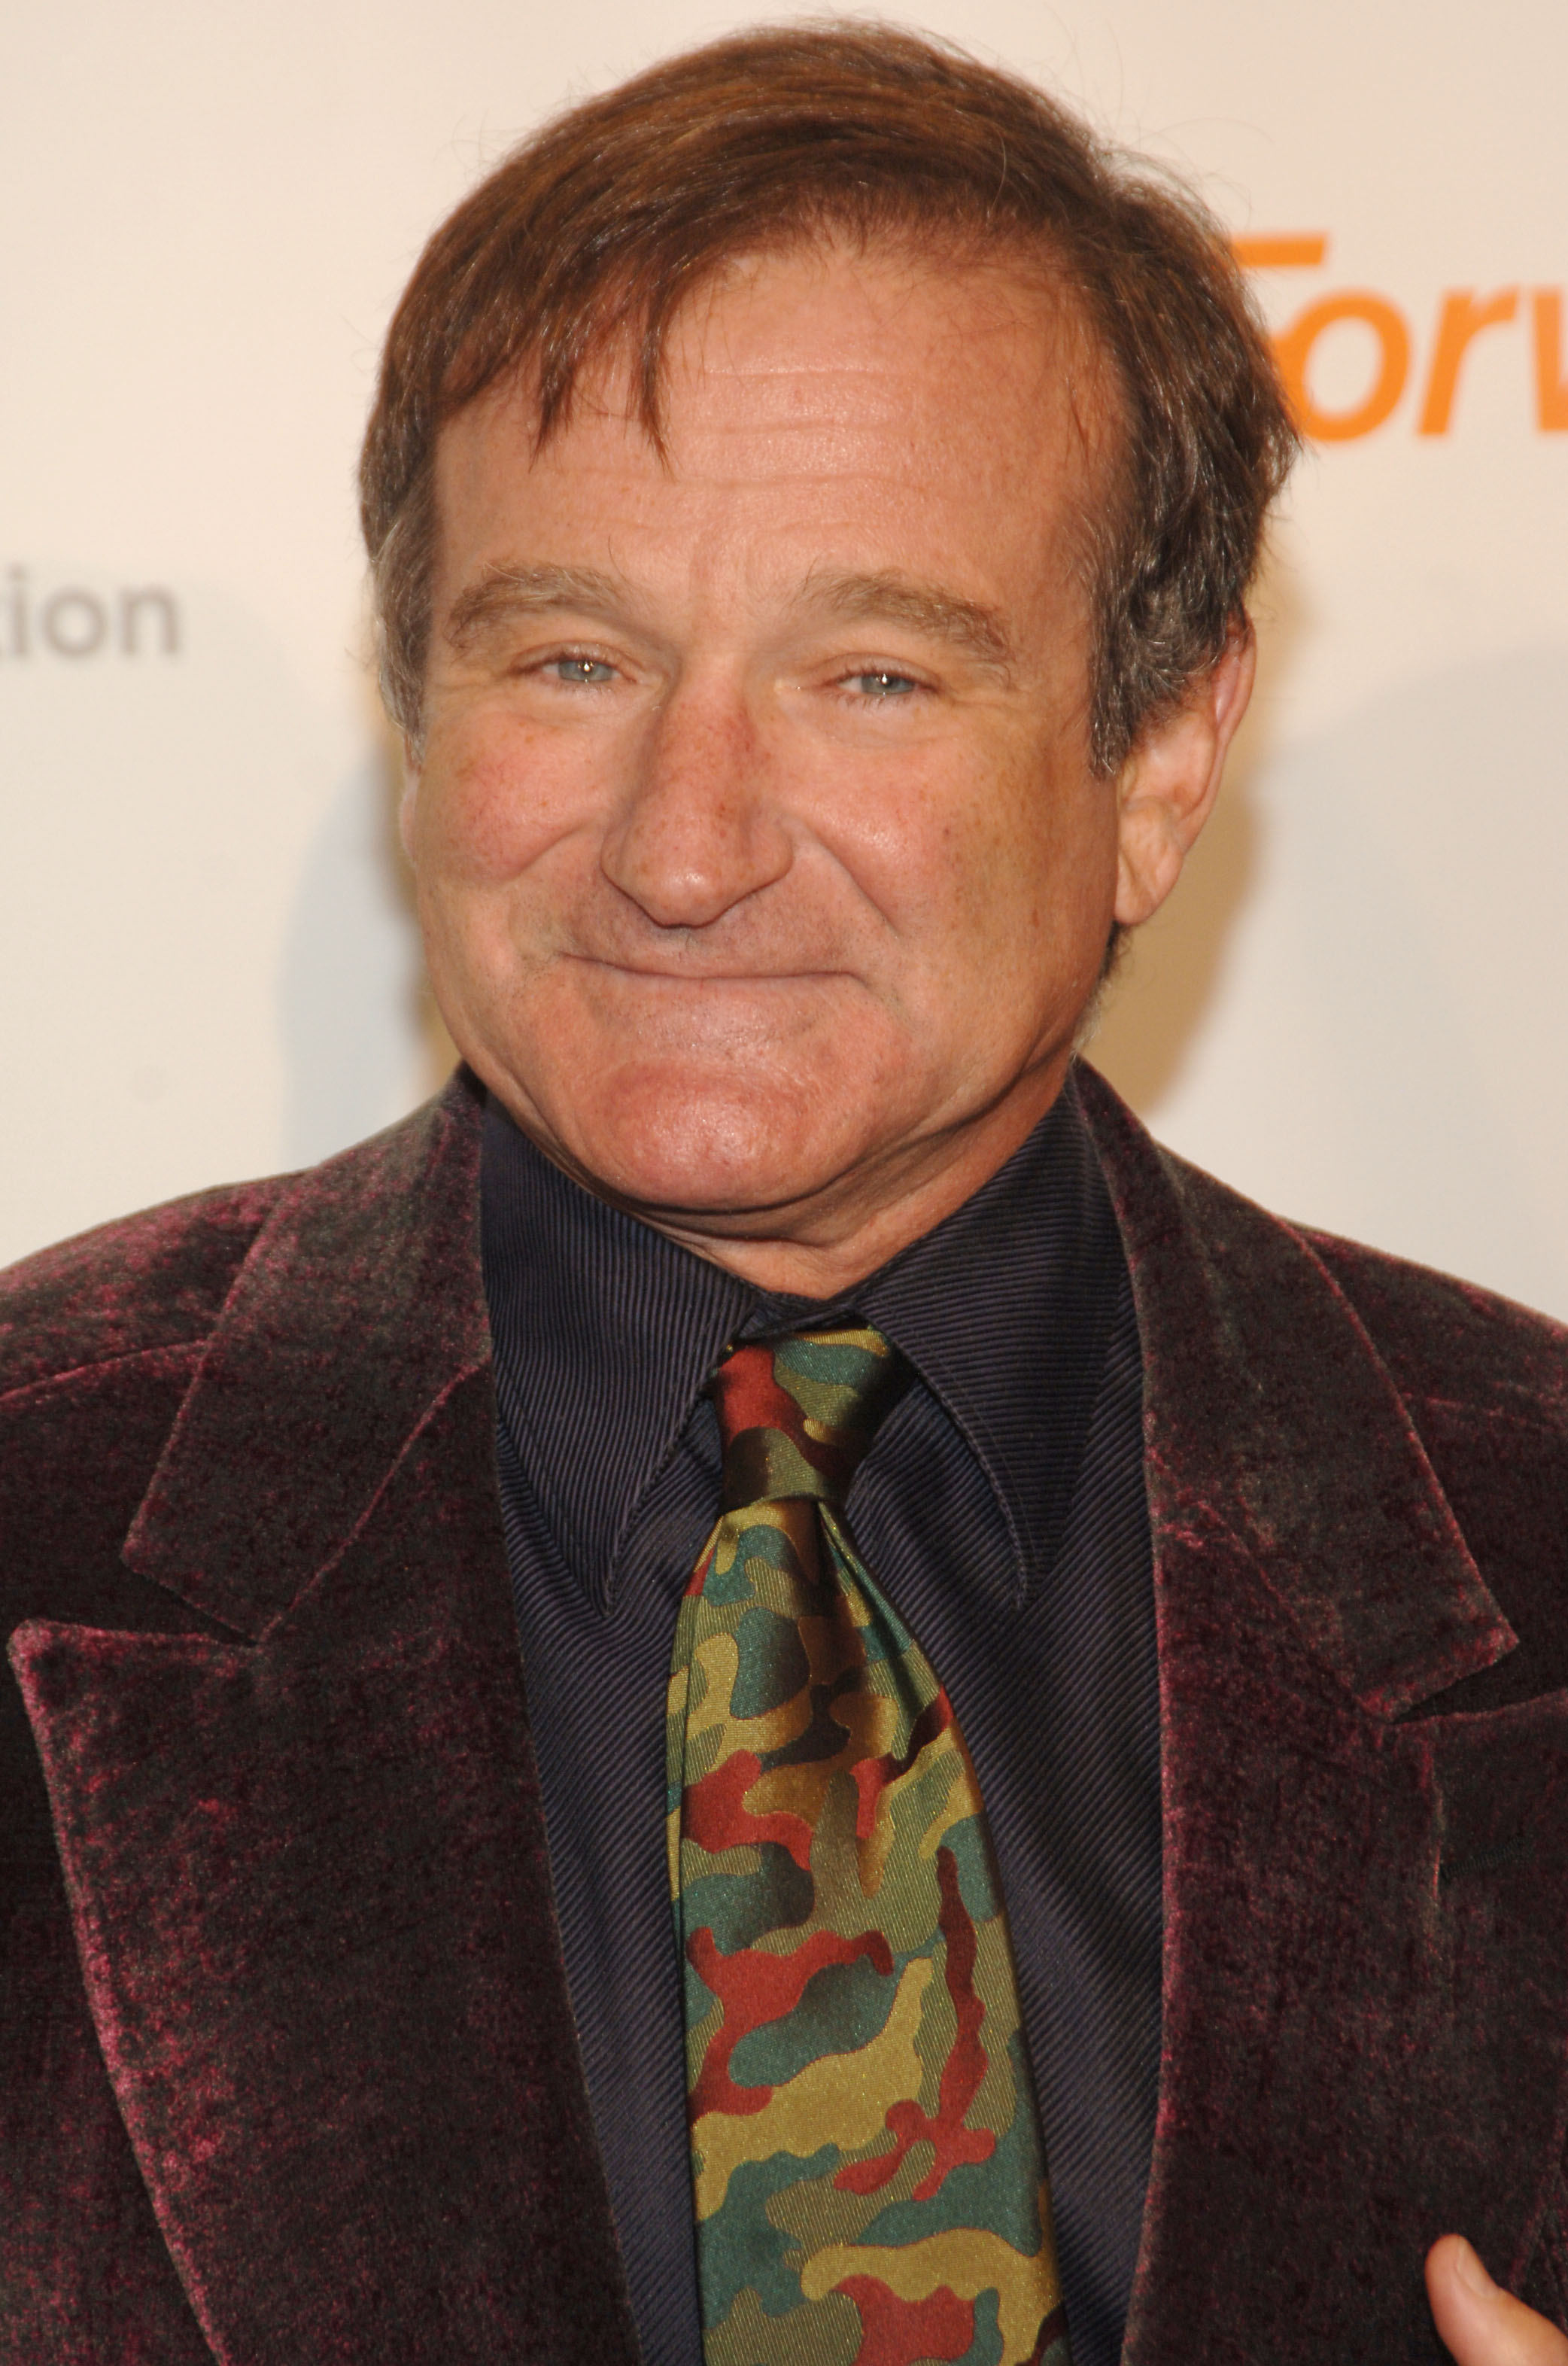 Robin Williams during The Christopher Reeve Foundation's "A Magical Evening" - Red Carpet at Marriott Marquis in New York, New York, United States | Source: Getty Images